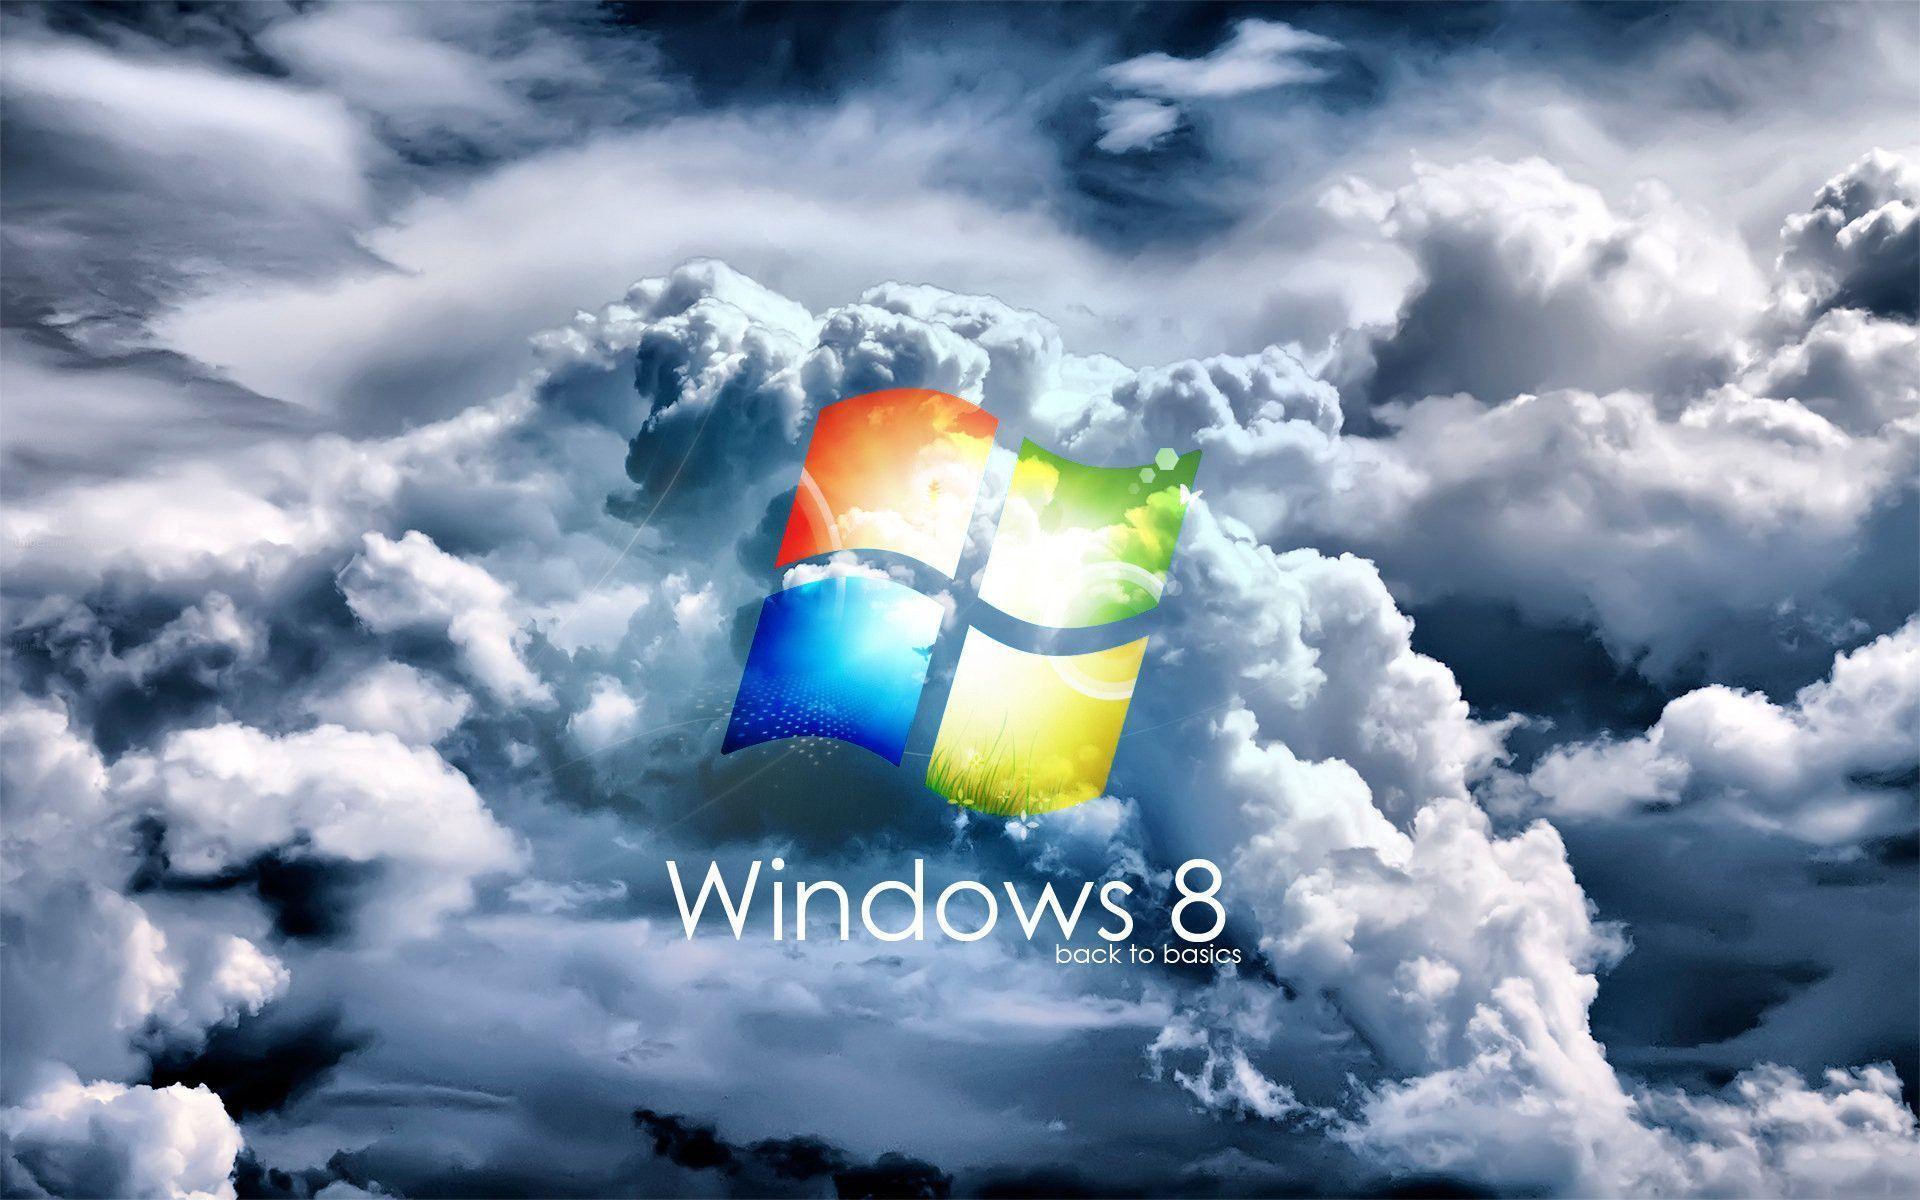 Download 30 Cool Windows 8 Wallpapers HD Collection